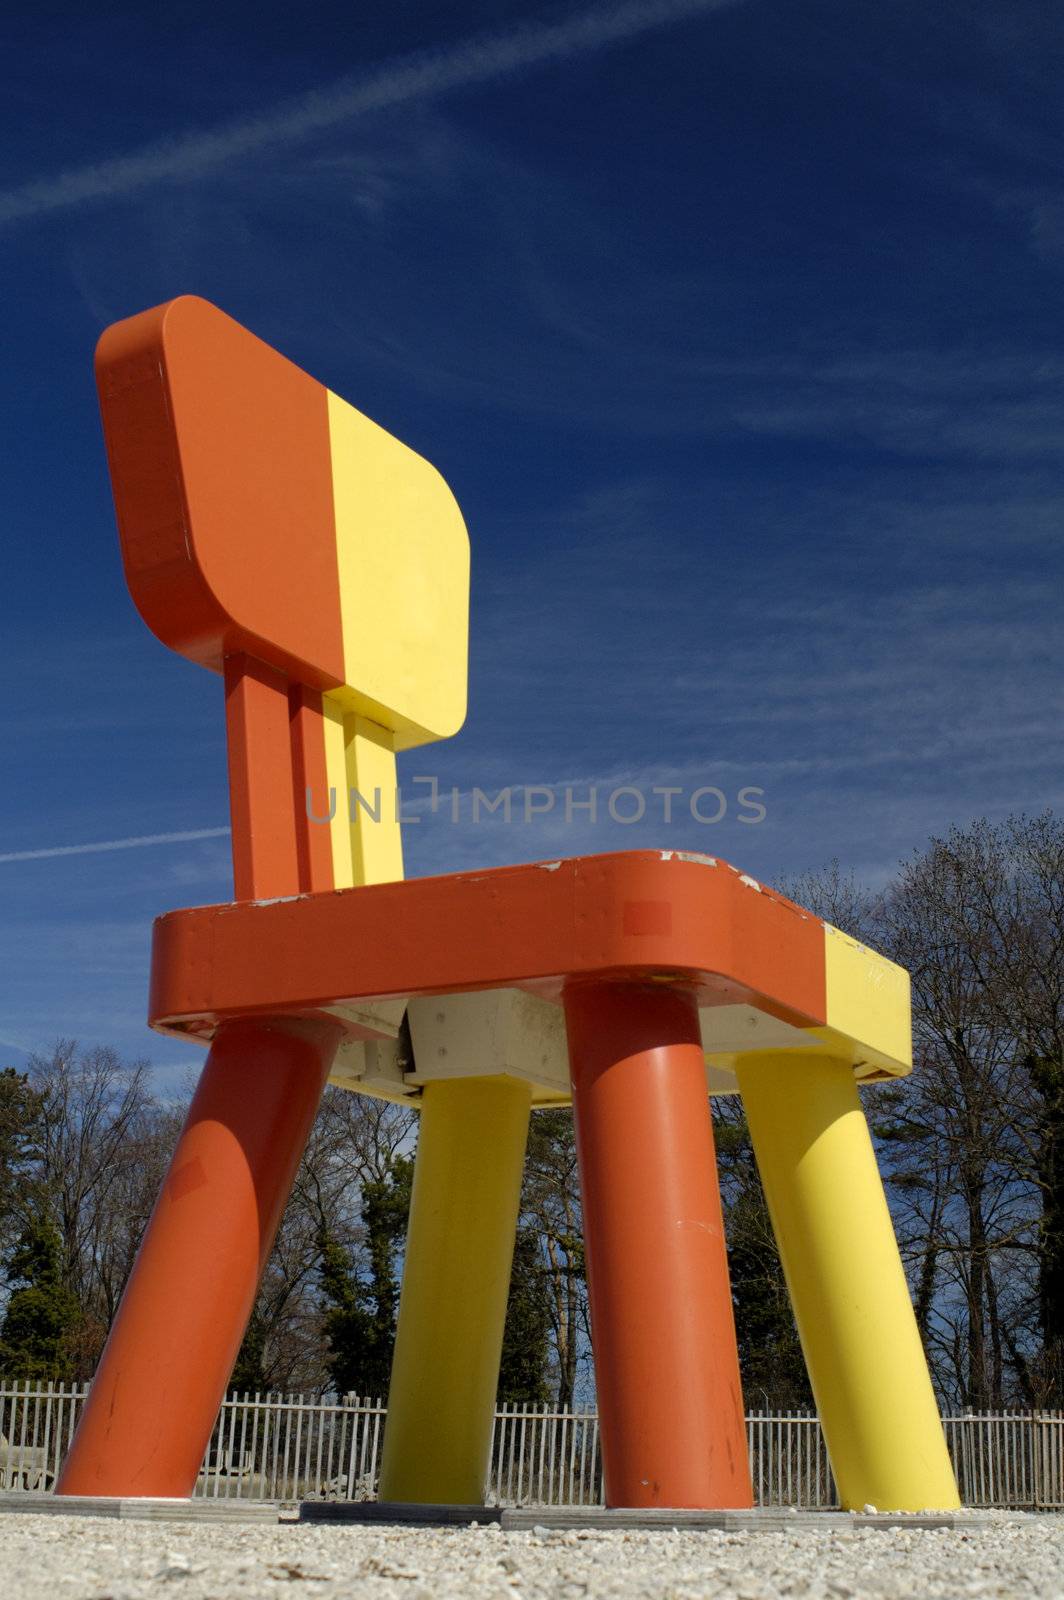 A huge chair towers over trees and a wooden fence, against a rich blue sky.